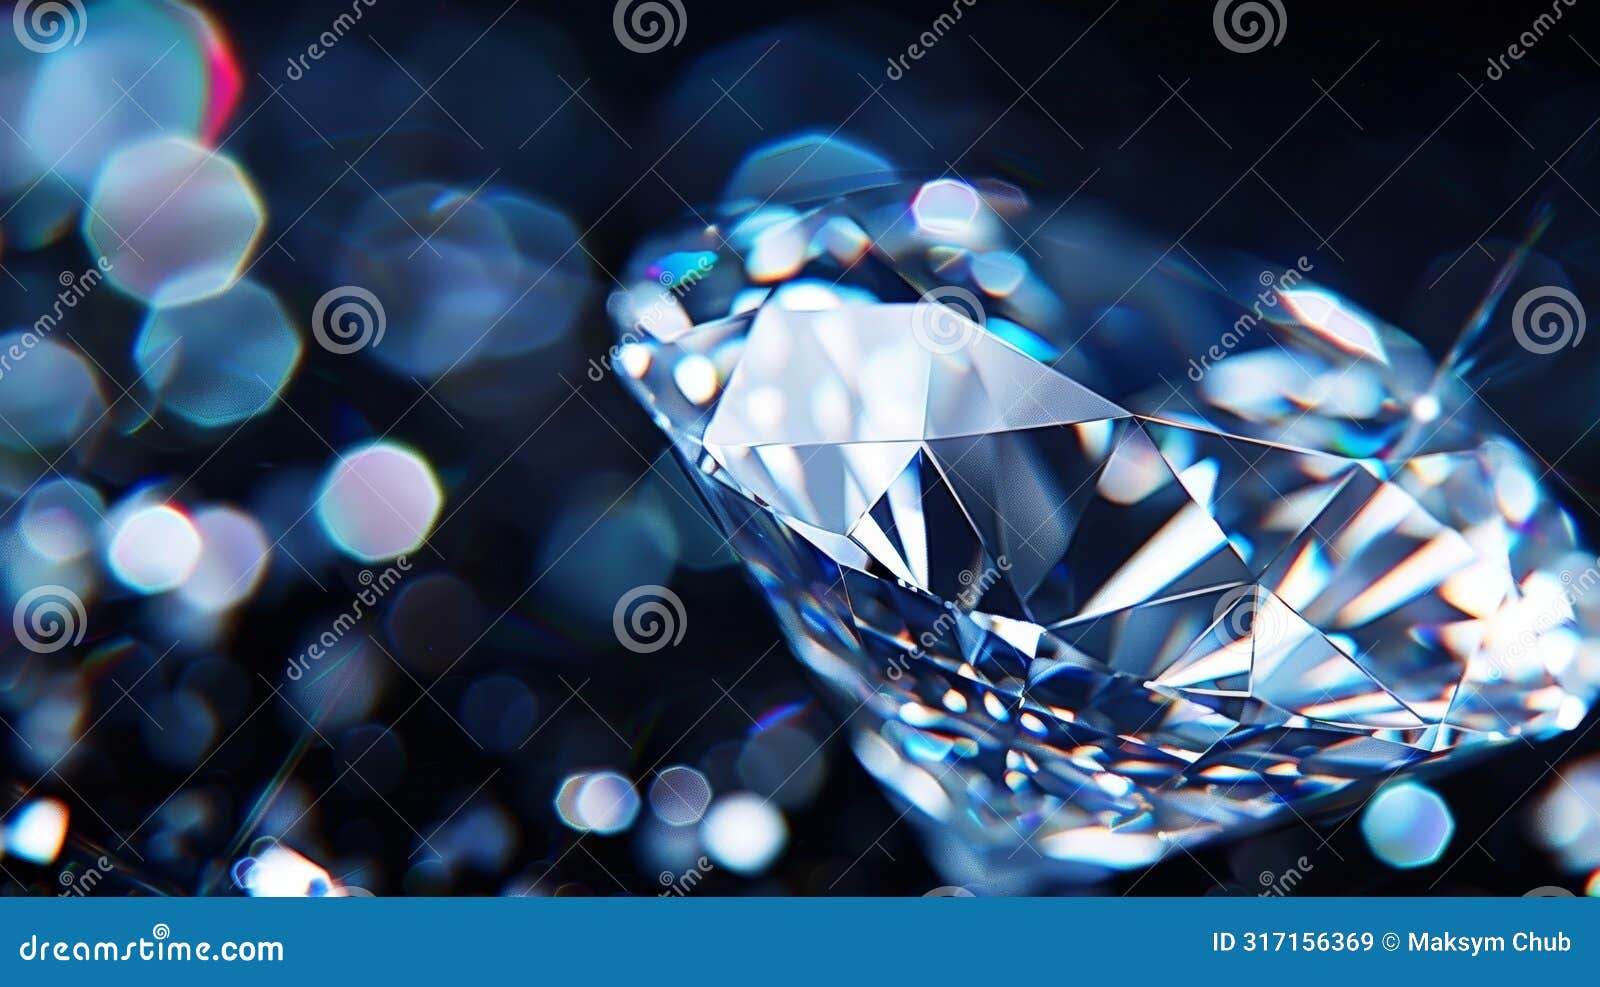 flawless diamond close up expertly lit to showcase cut, color, and carat weight